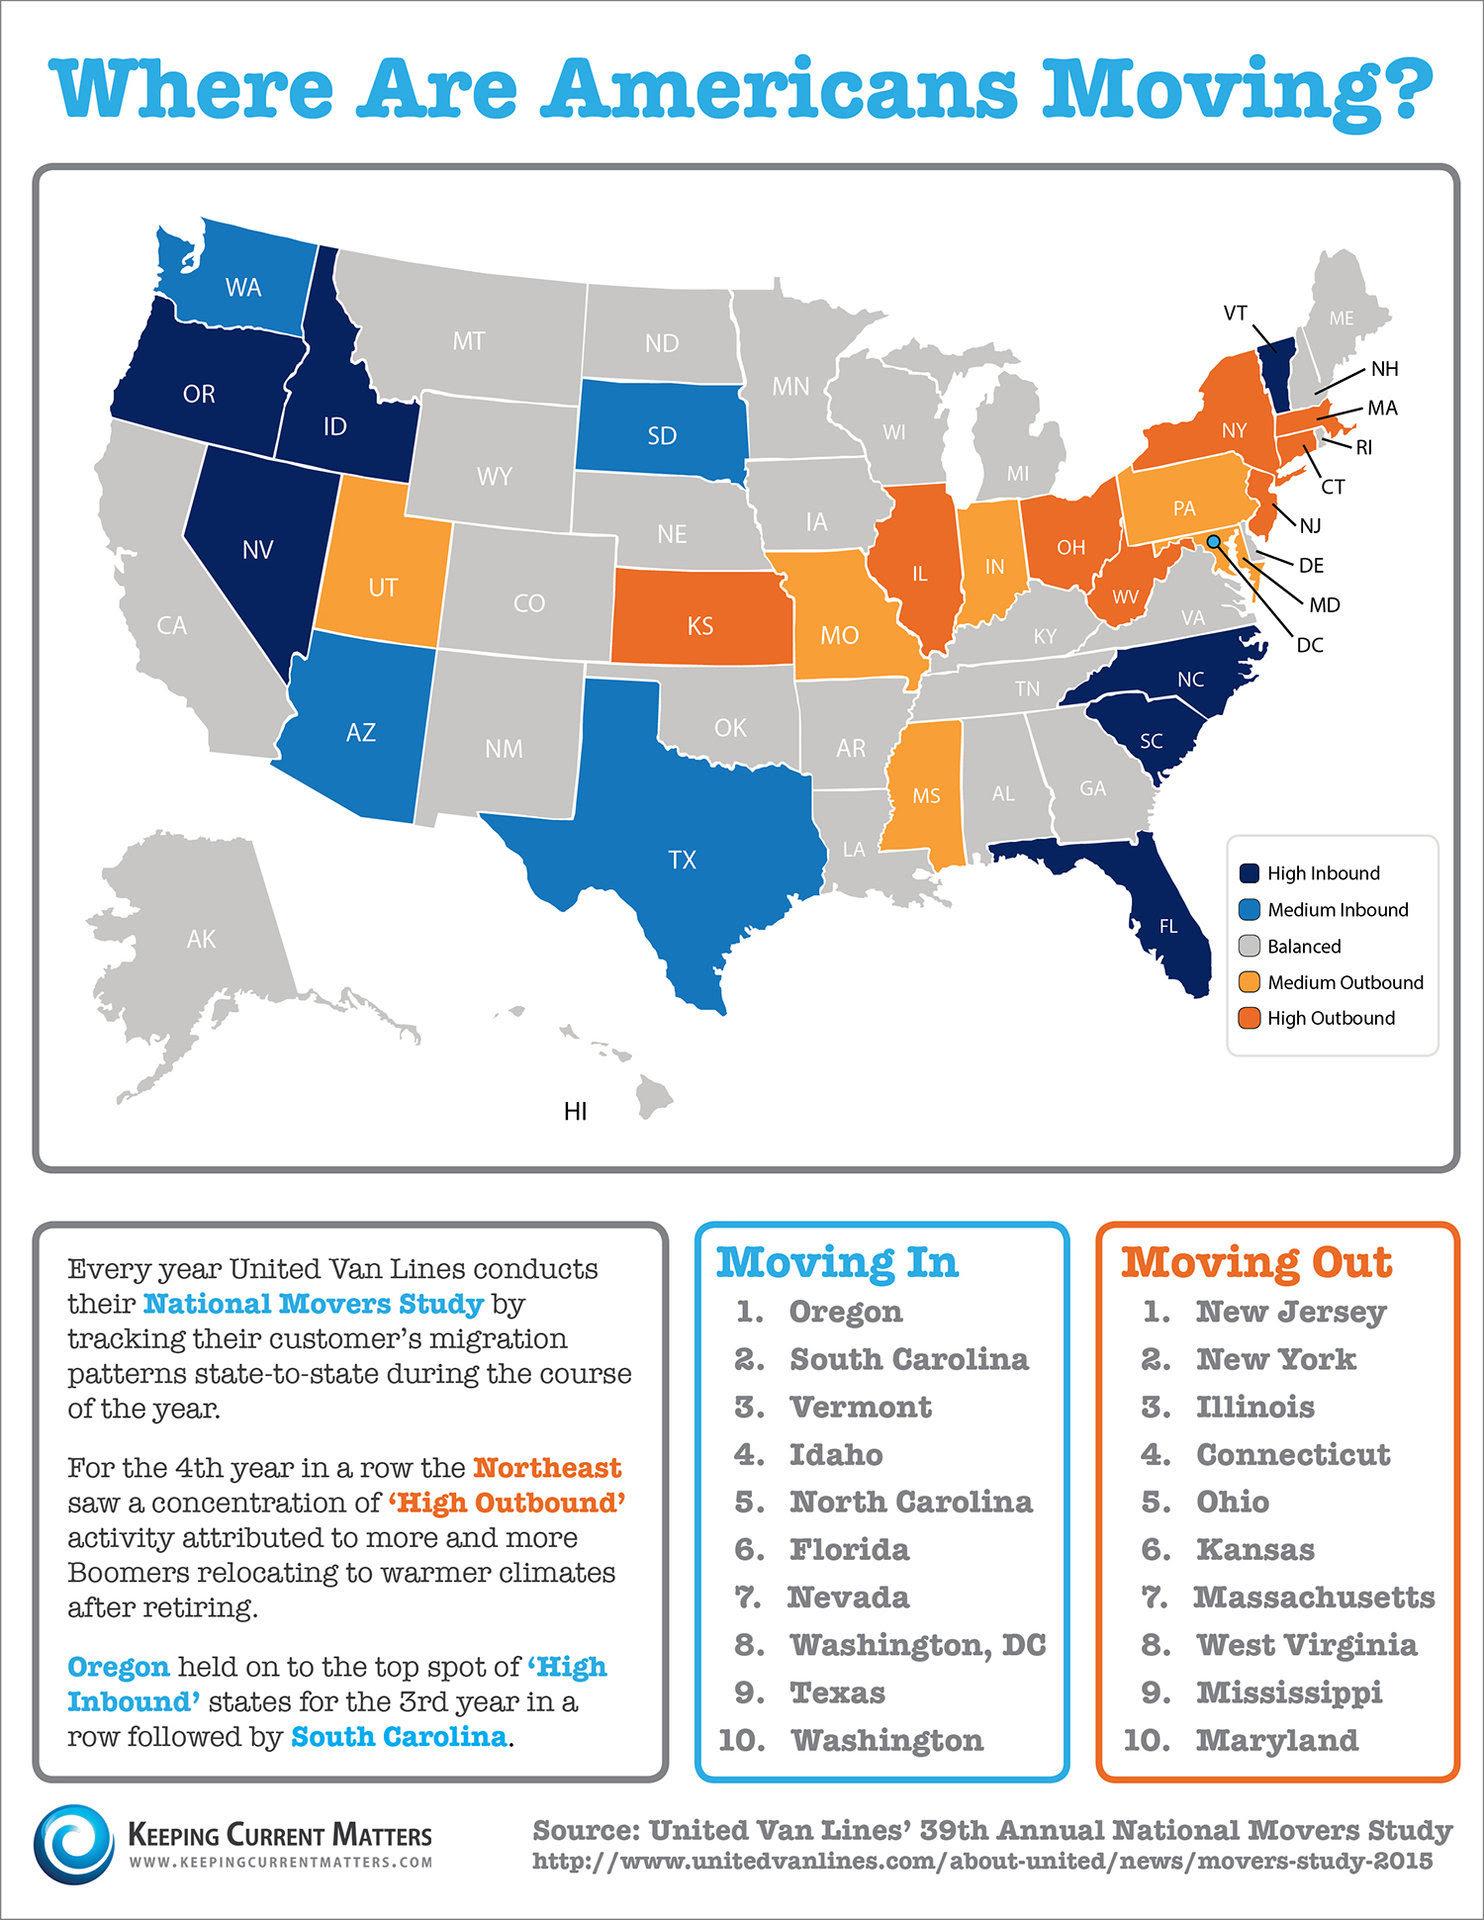 Where Are Americans Moving? [INFOGRAPHIC] | Keeping Current Matters